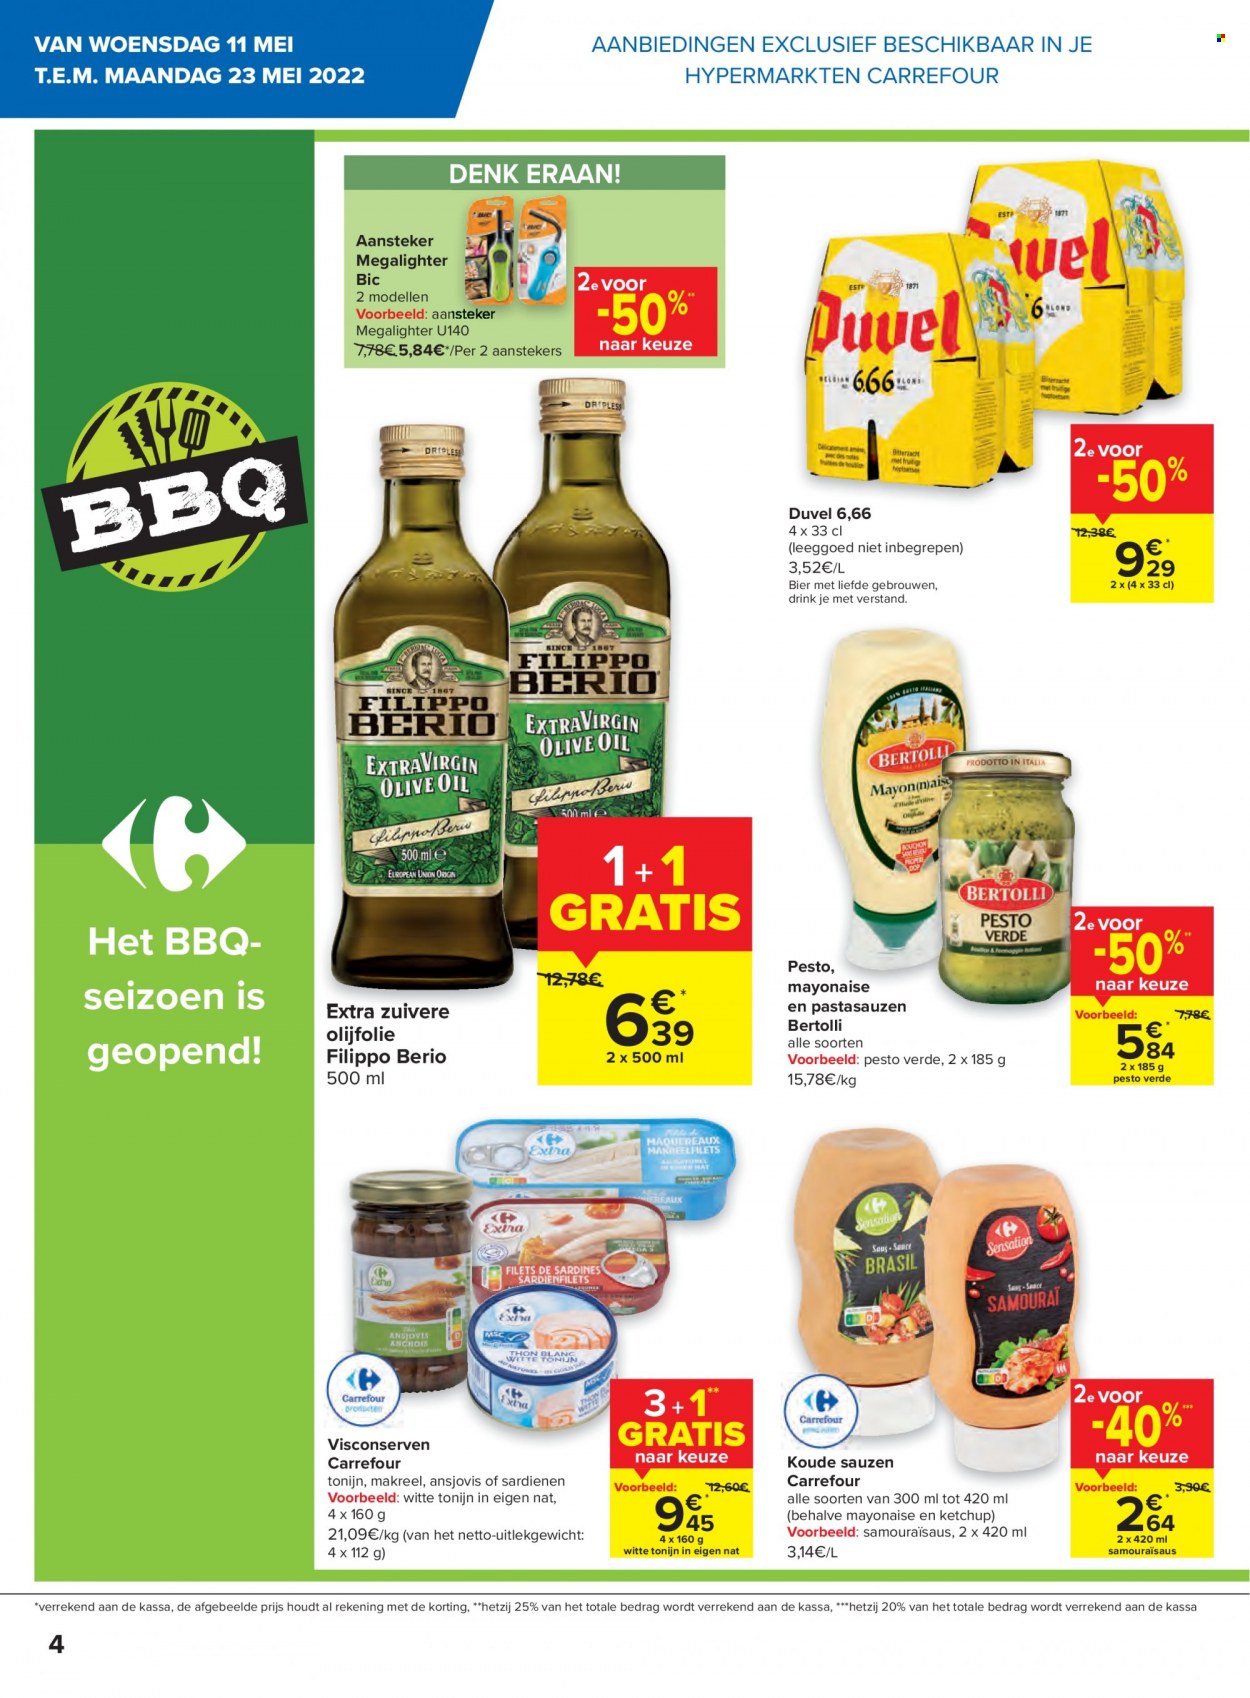 Catalogue Carrefour hypermarkt - 11.5.2022 - 23.5.2022. Page 4.